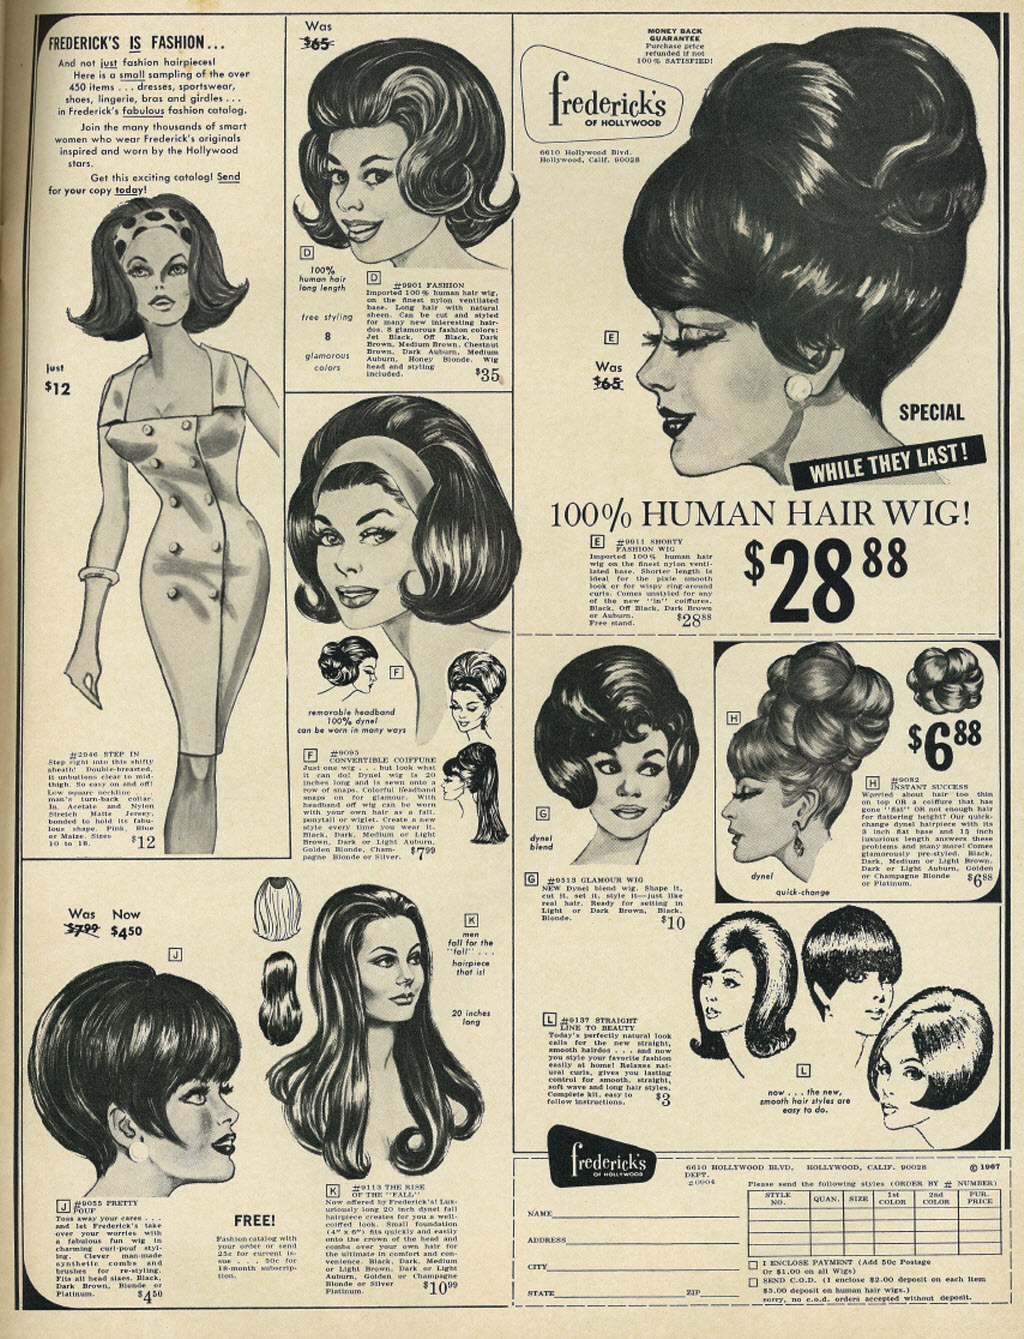 19 Vintage Ads for Fashion Wigs and Hairpieces From the 